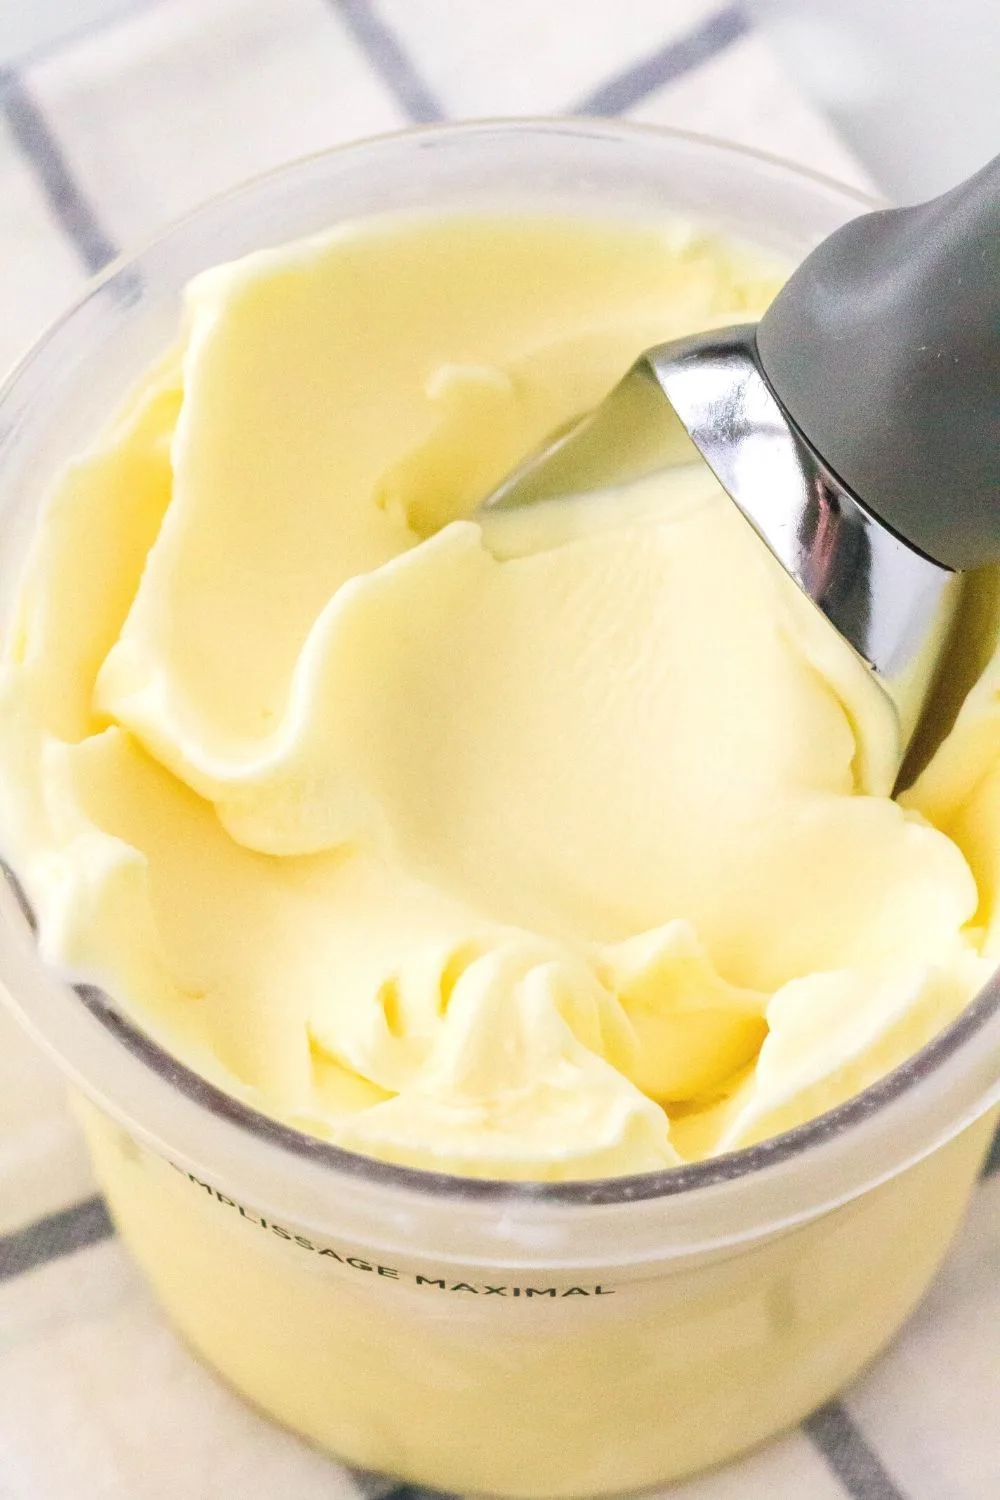 close-up view of a Ninja Creami pint of lemon ice cream with a scoop in it, showing the creamy texture.